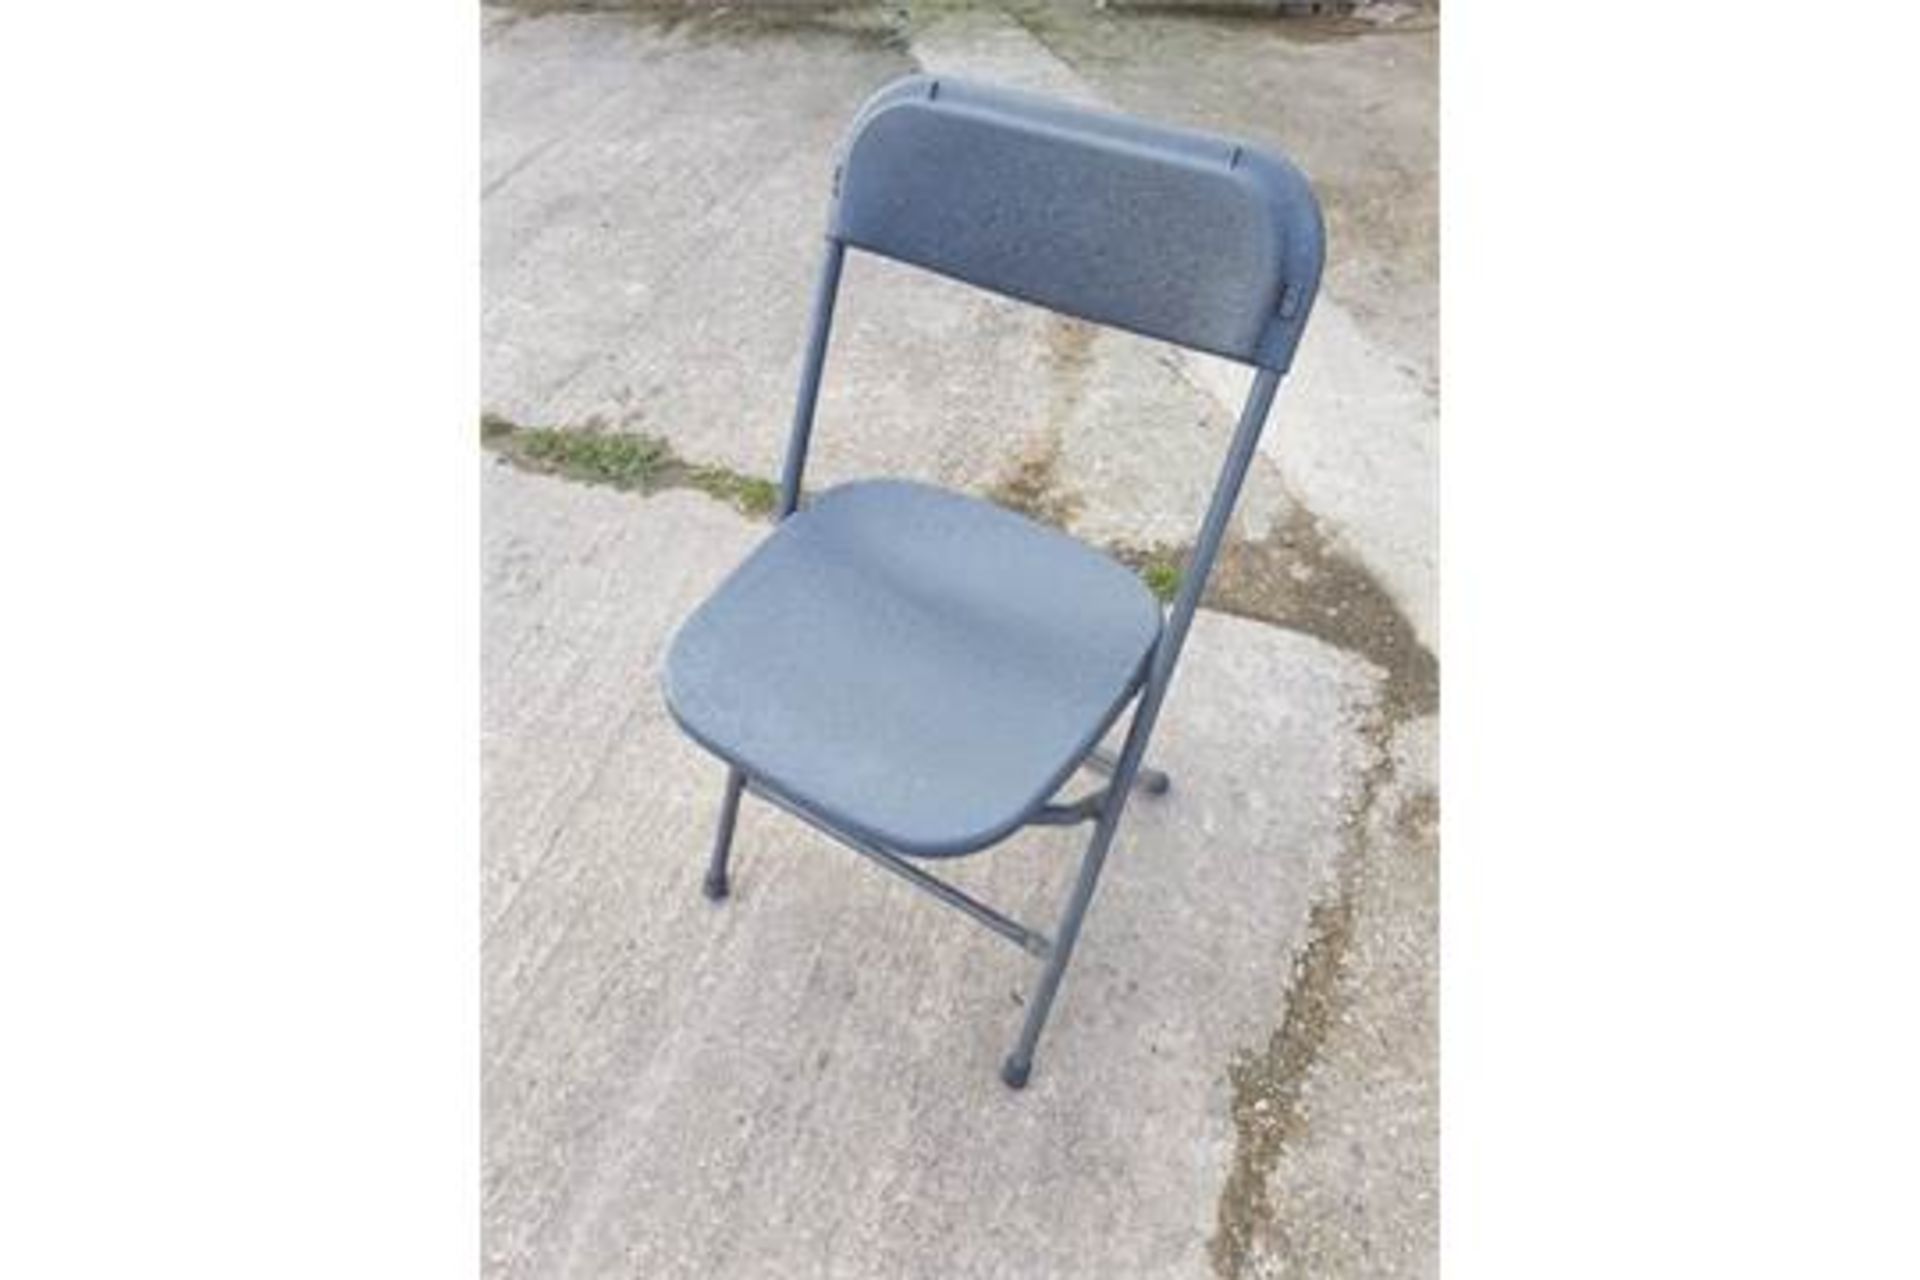 Lot of 40 x Used Fold Up Banqueting Chairs  - Good Condition – NO VAT